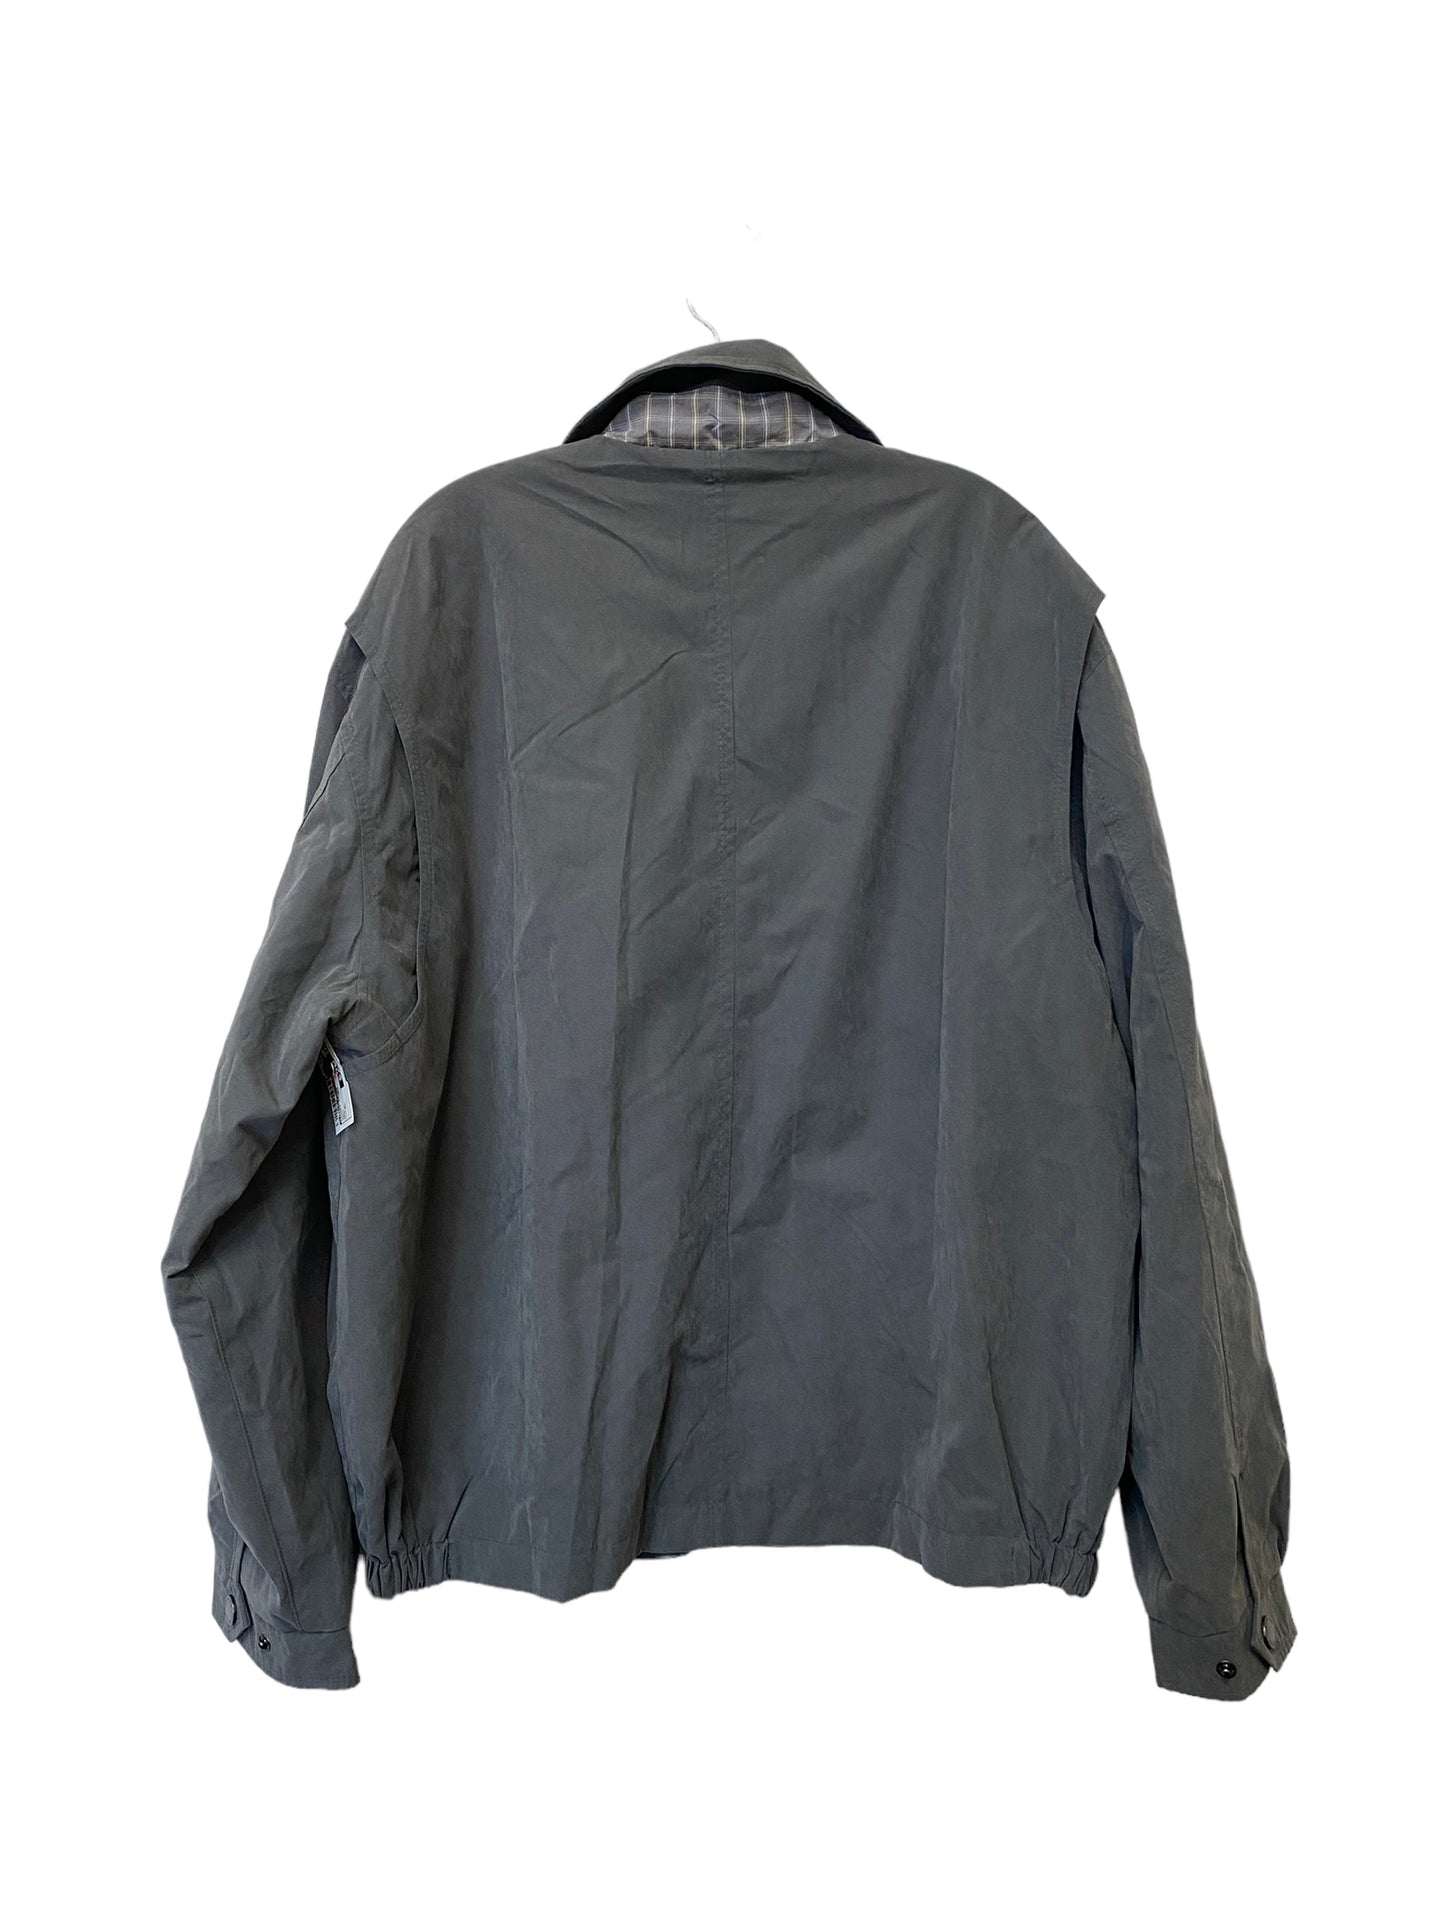 Jacket Other By London Fog  Size: Xl